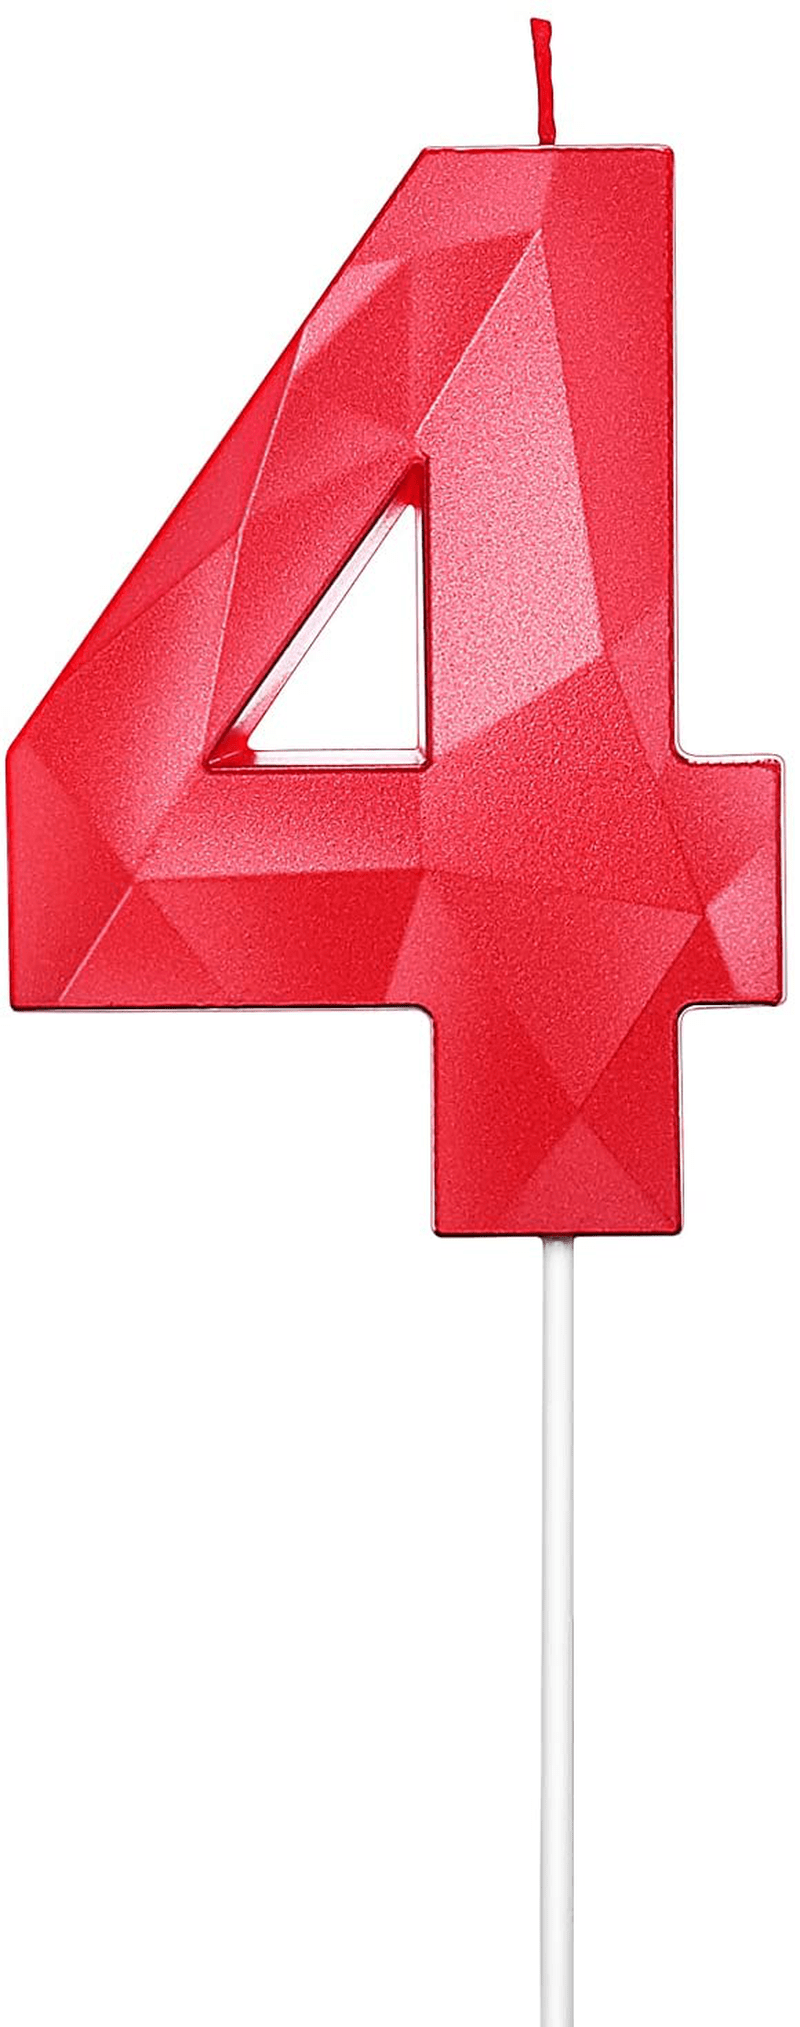 2.76 Inches 3D Diamond Shape Birthday Cake Candle Number 2 ,Red Color Happy Birthday Cake Cupcake Toppers Decoration for Wedding Anniversary,Party Celebration,Family Baking(RED Number 2) Home & Garden > Decor > Home Fragrances > Candles MEIMEI Red number 4 